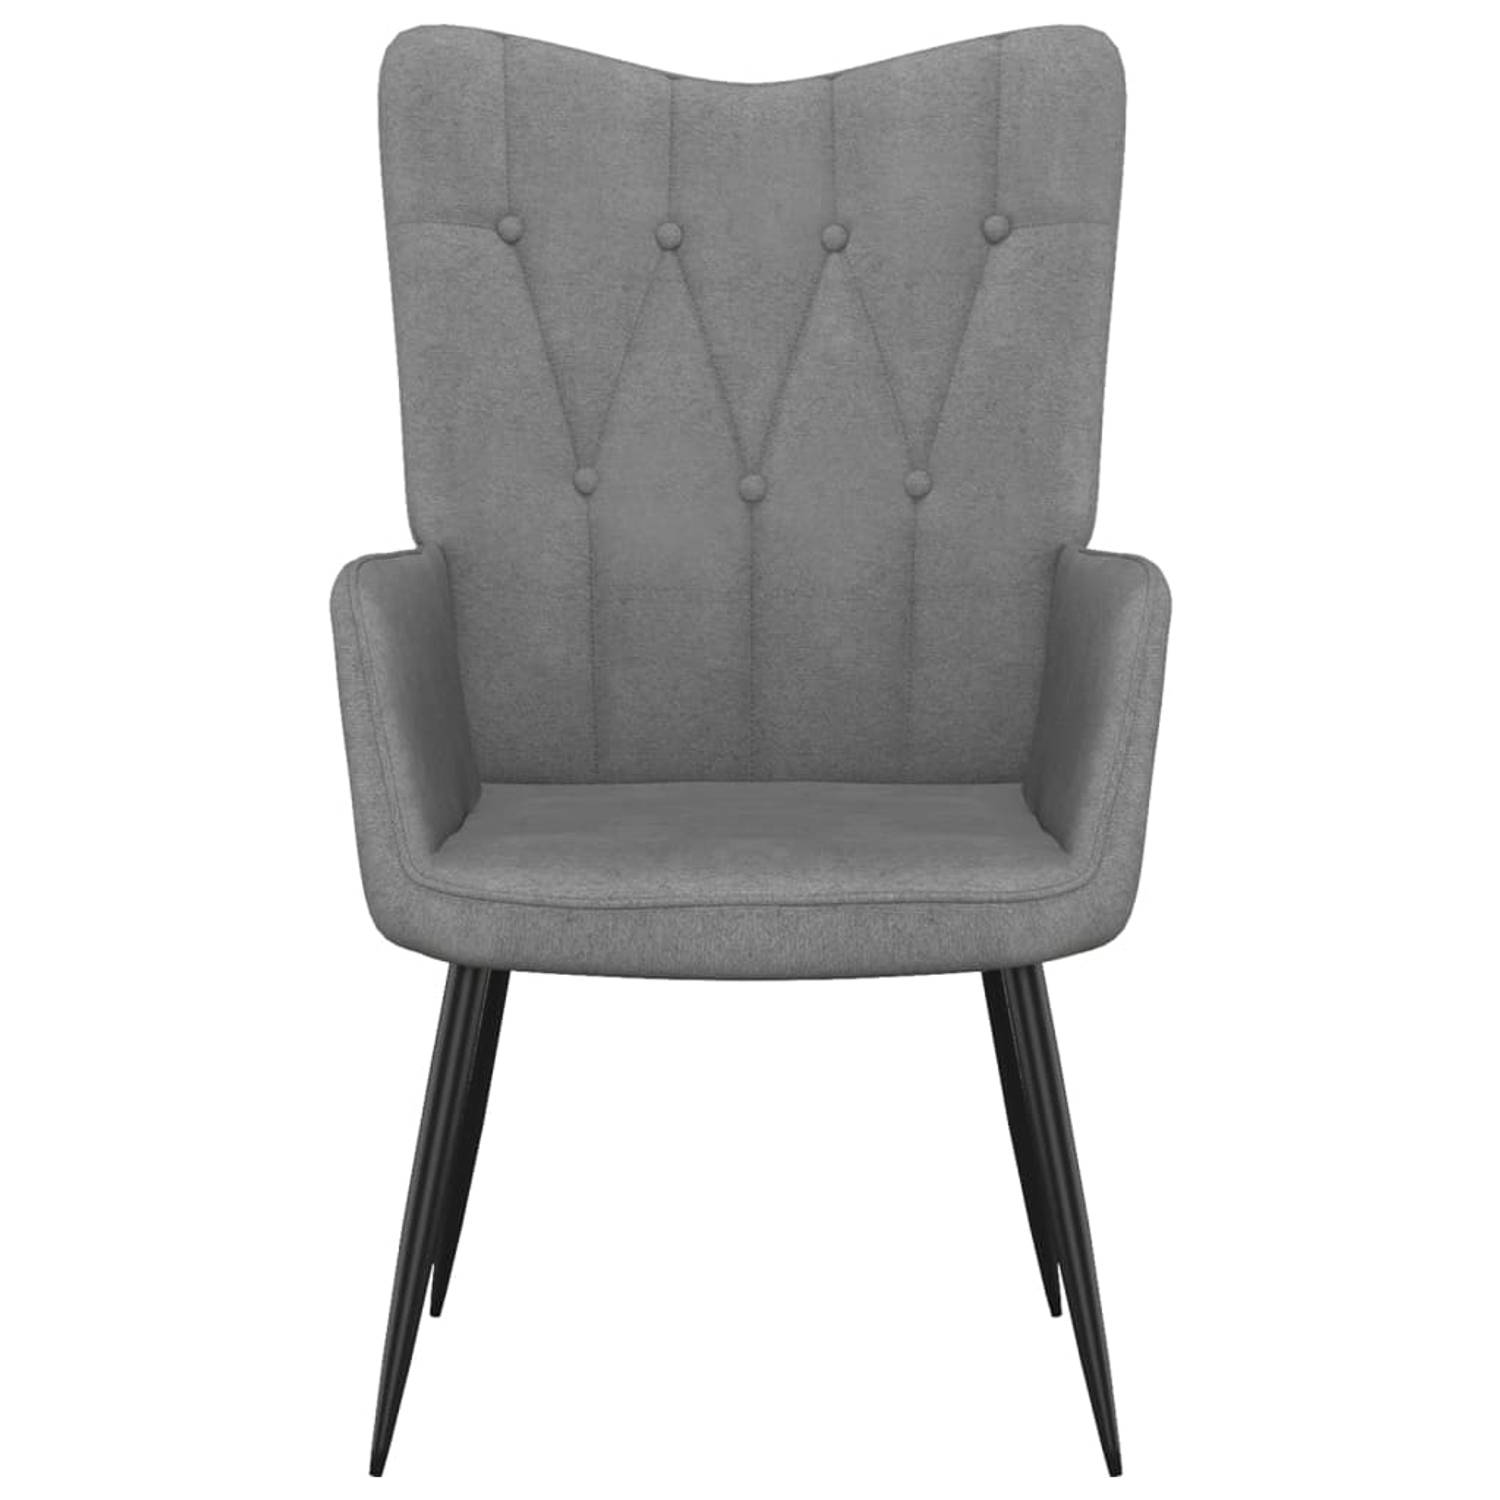 The Living Store Relaxstoel stof donkergrijs - Fauteuil